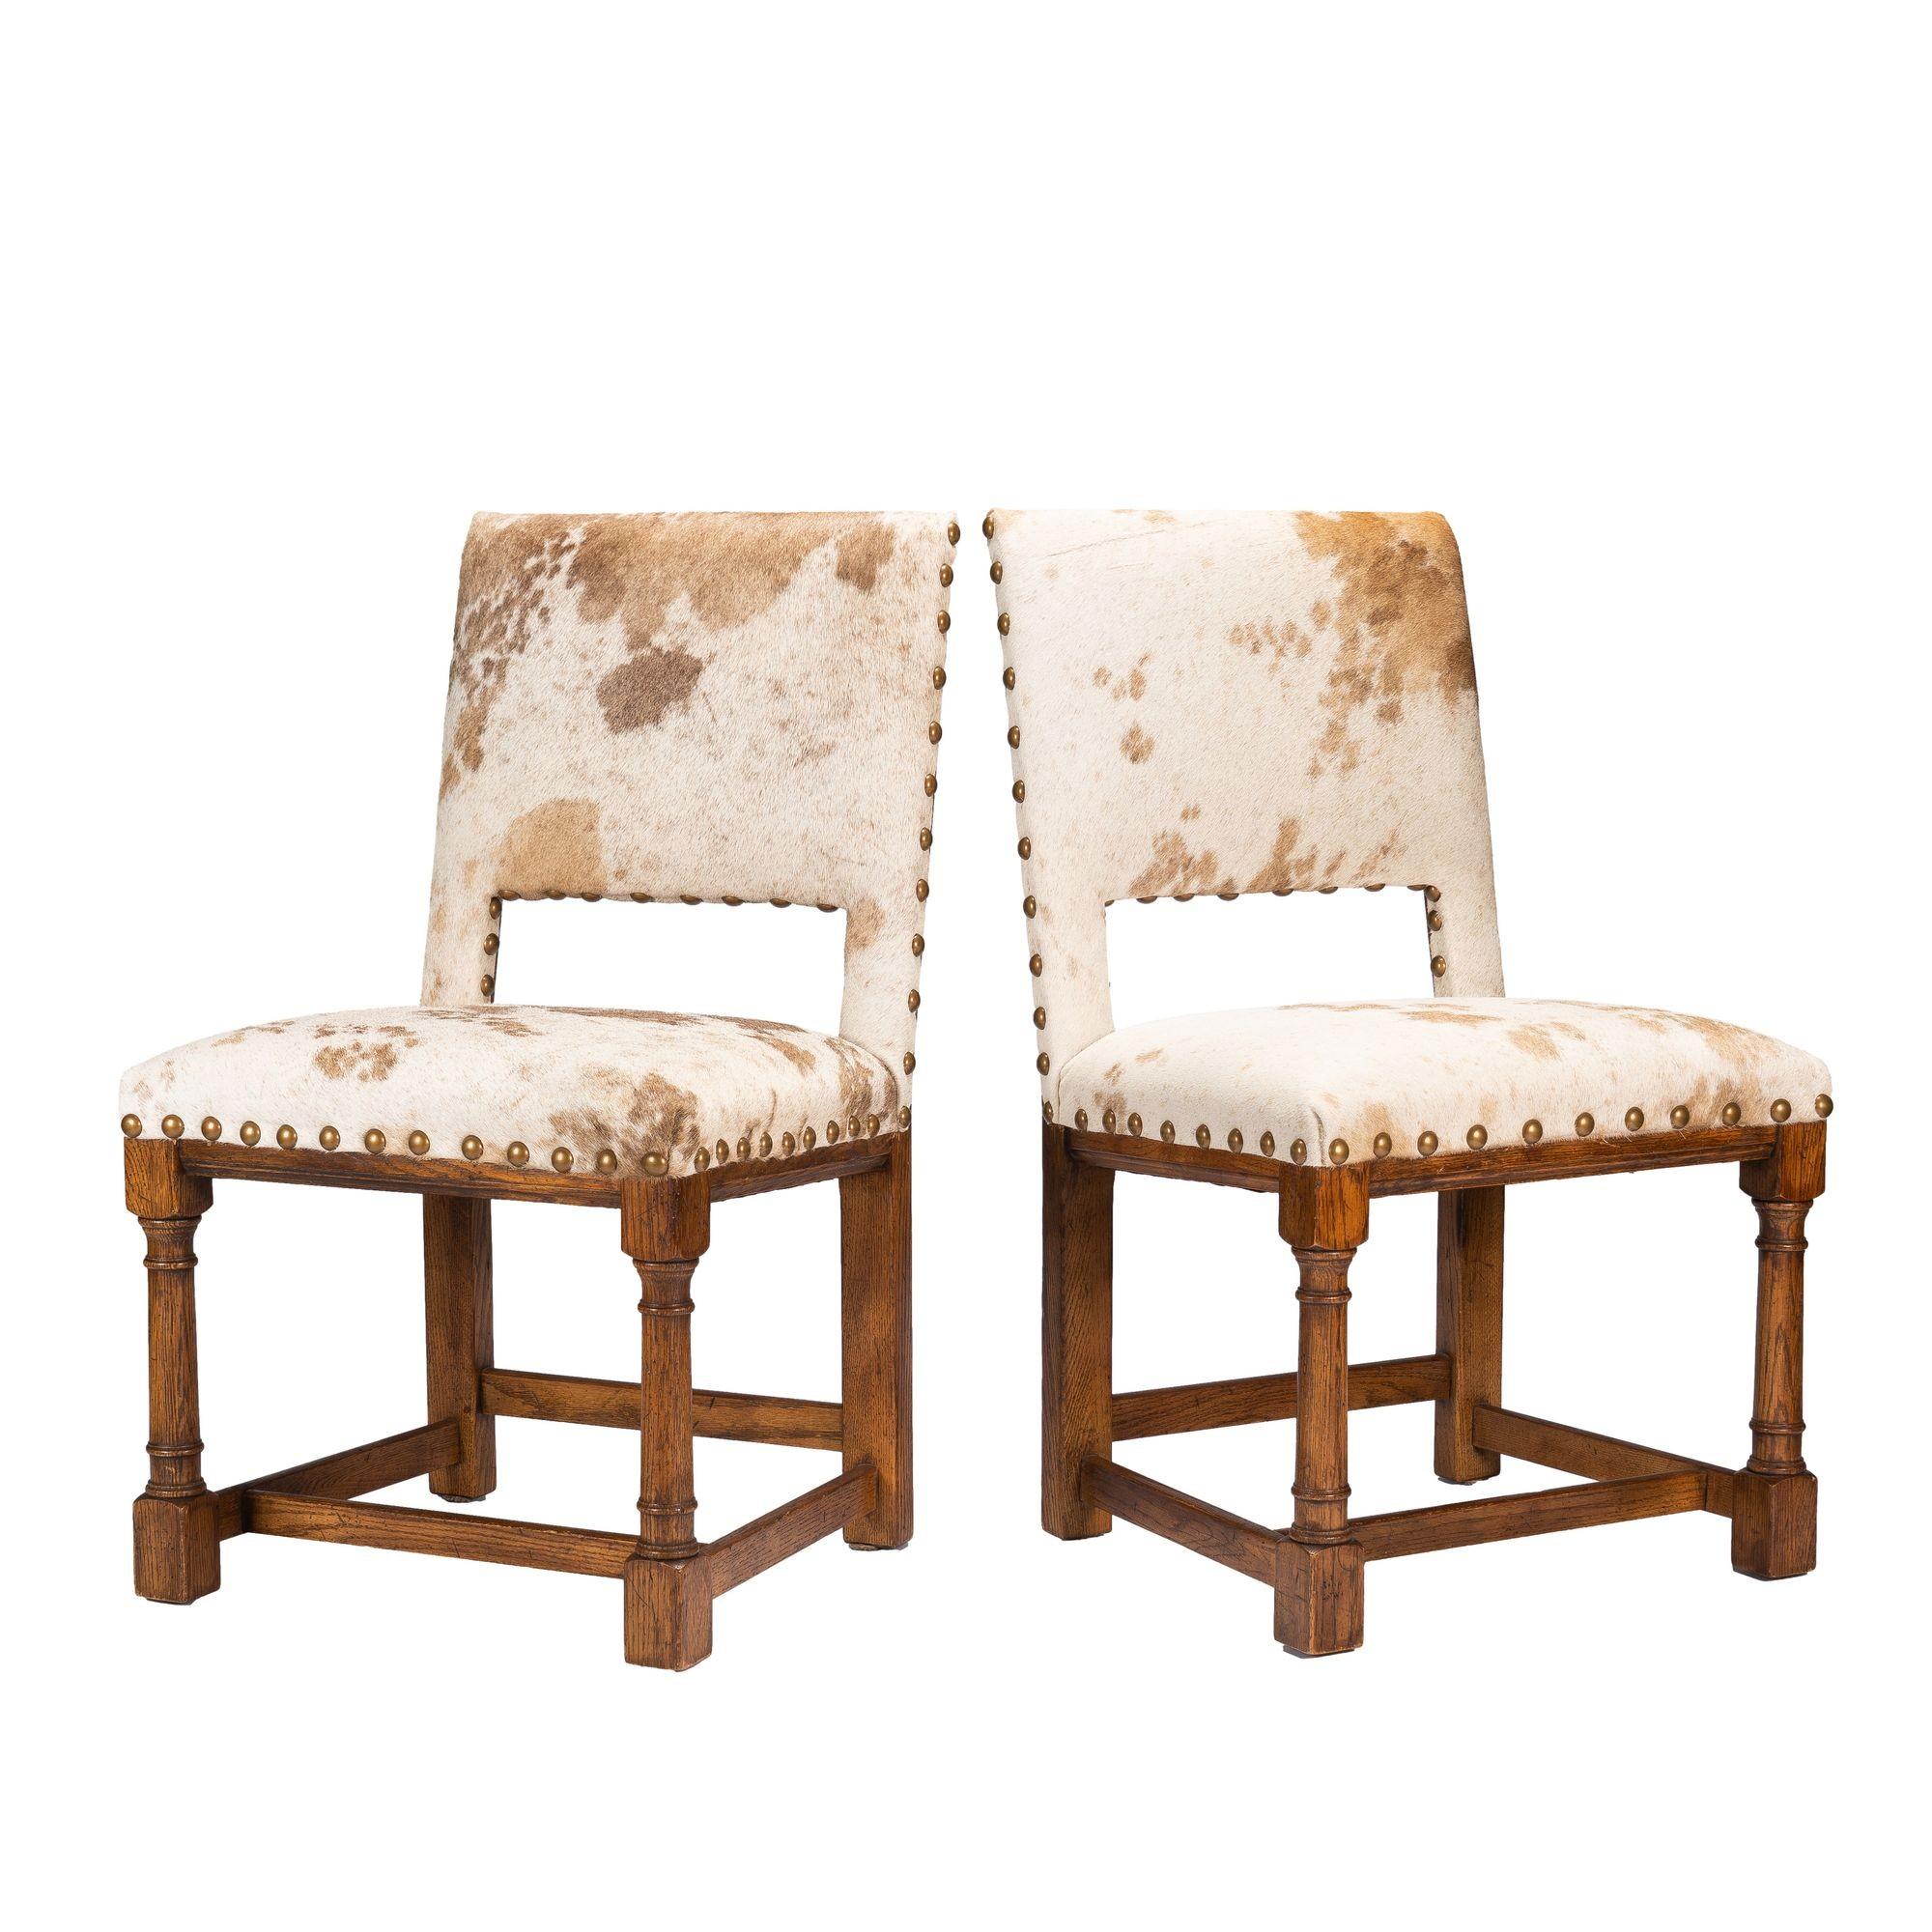 Pair of Jacobean style hair on hide oak side chairs, 1920-35 For Sale 3